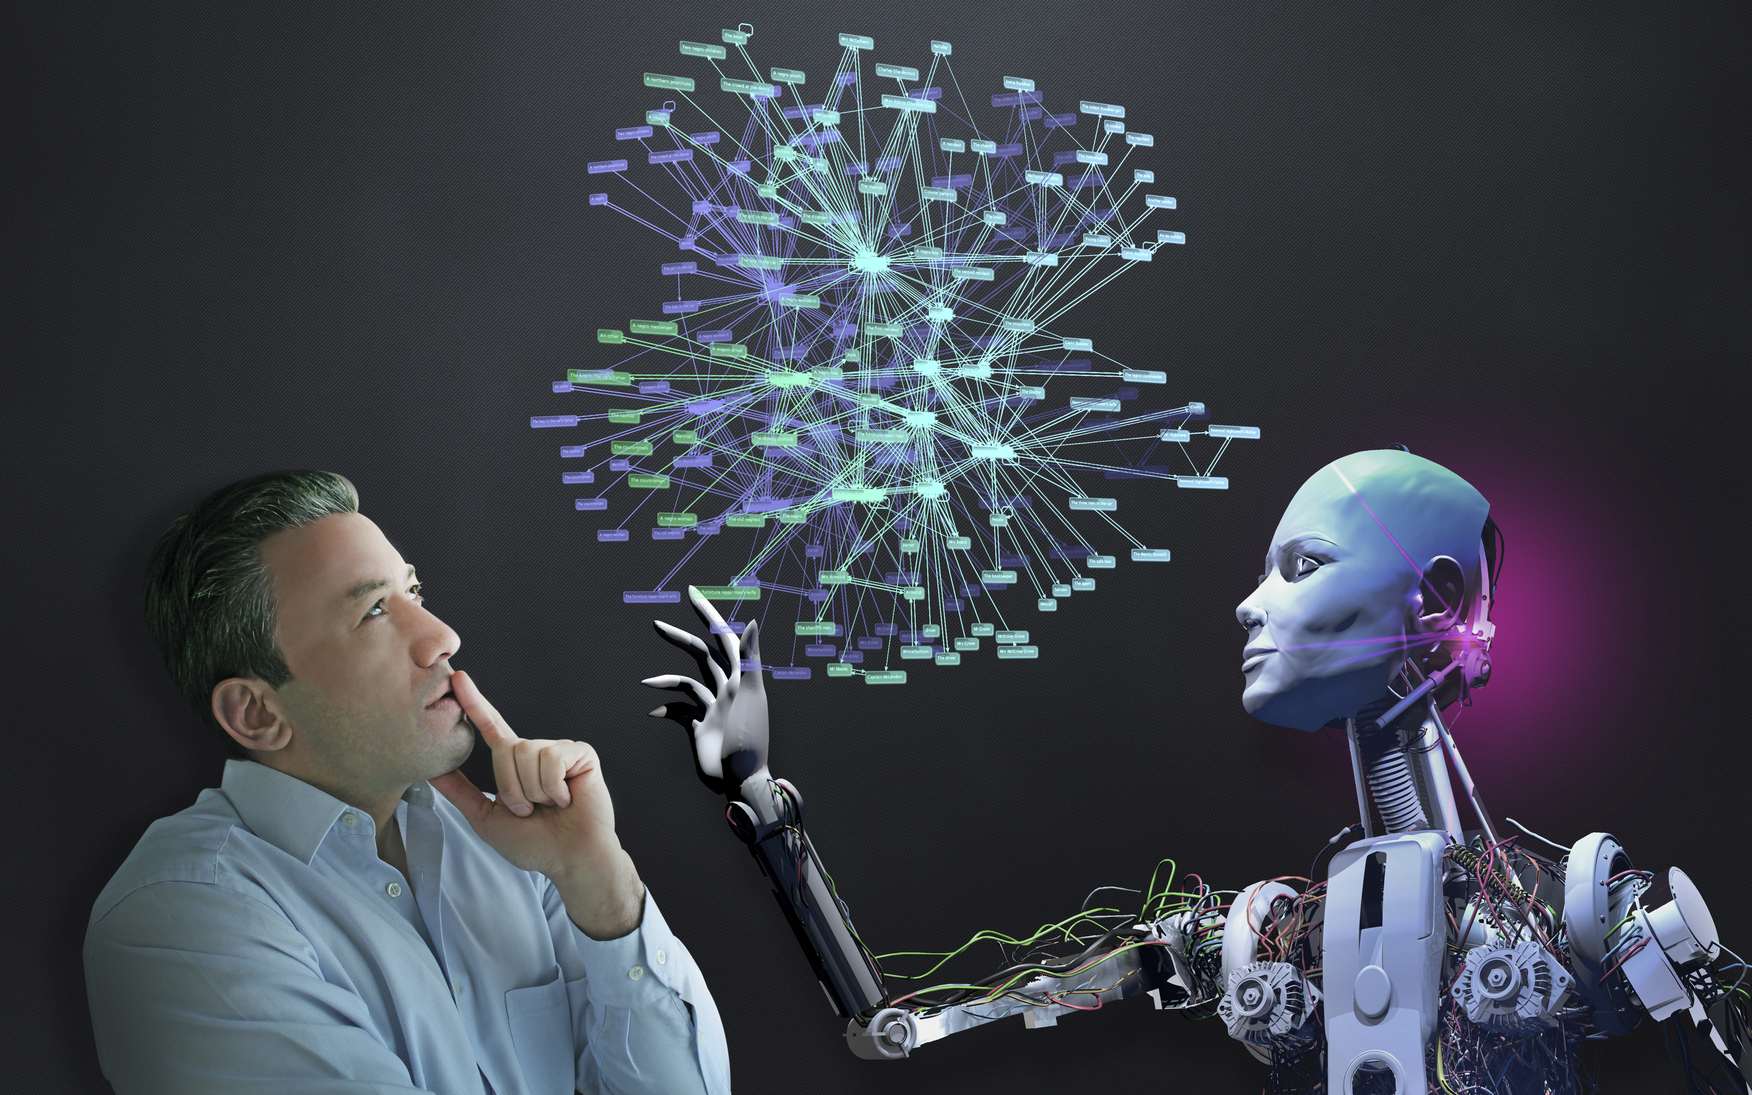 Human and robots to work together in the near future. This combination will accelerate developing technology. Businessman and cyborg organizes social media.